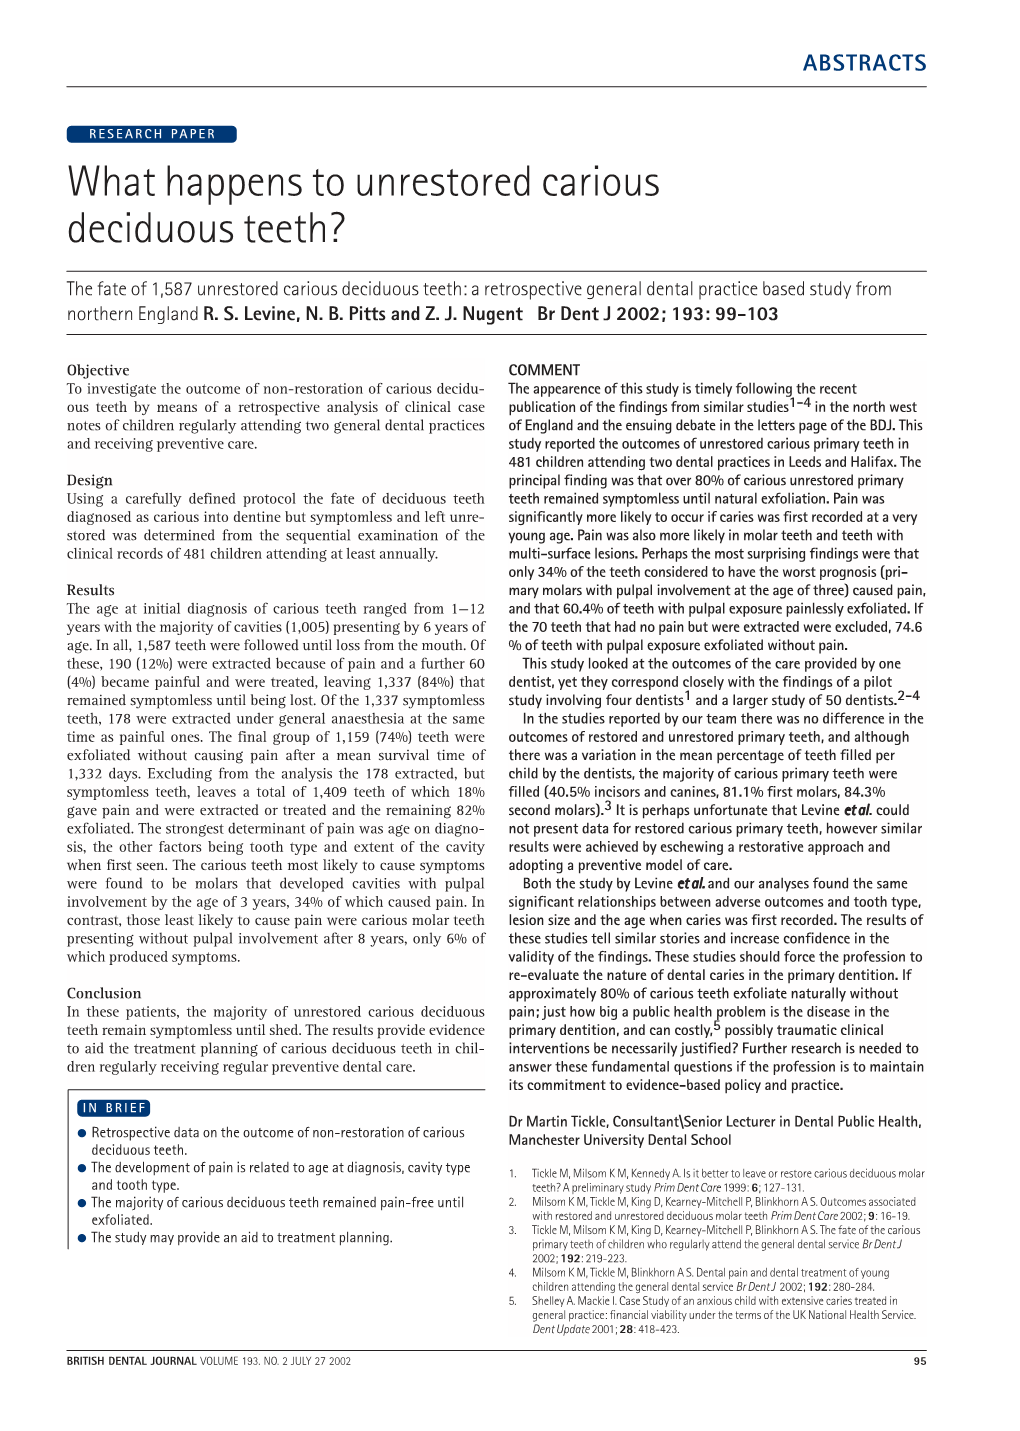 What Happens to Unrestored Carious Deciduous Teeth?